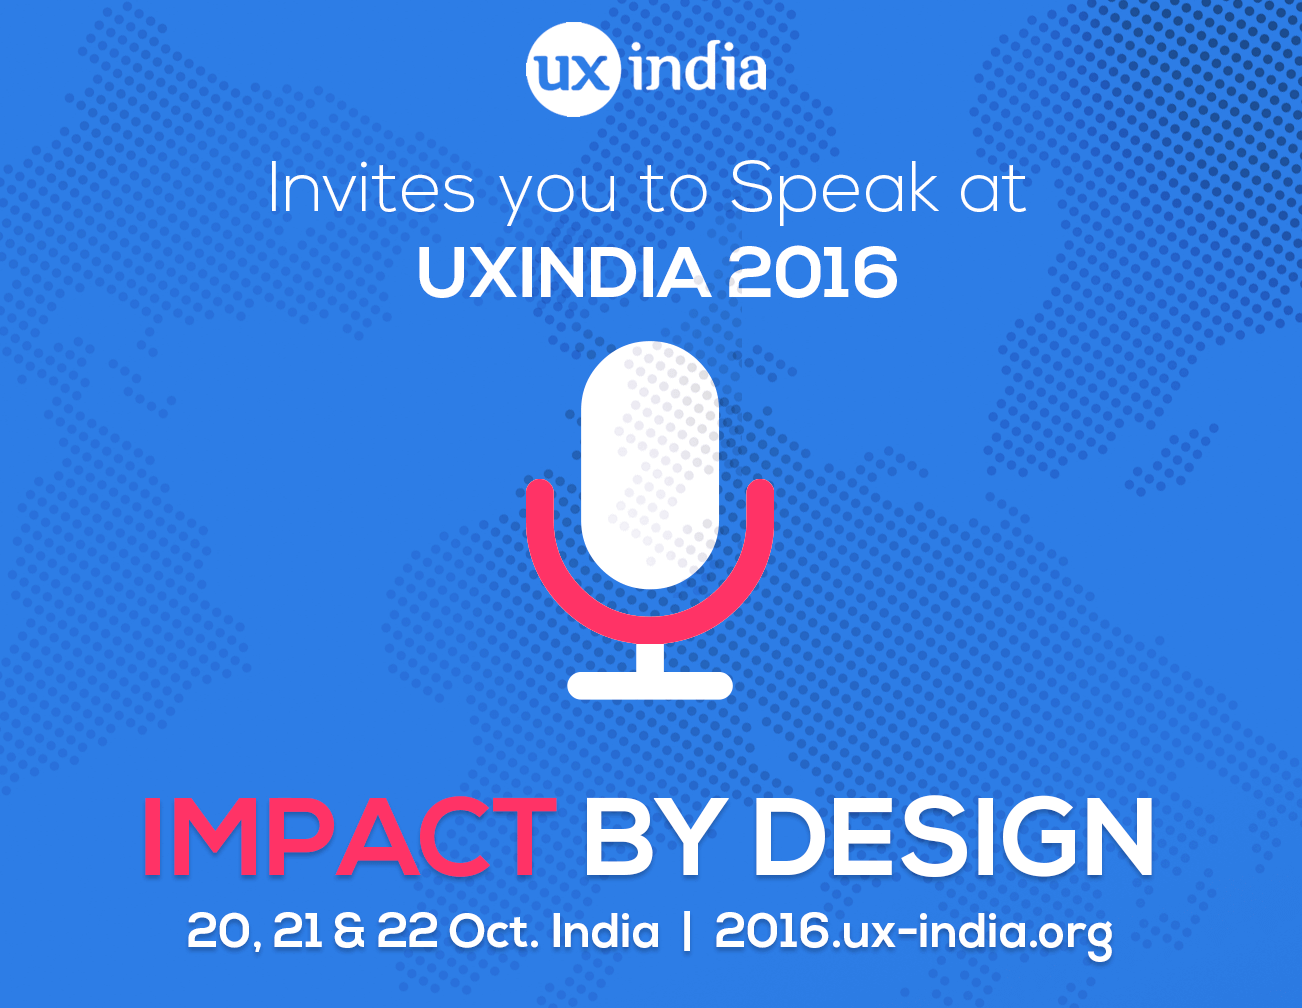 Submit your talk or workshop at UXINDIA 2016 : Driving value through customer experience